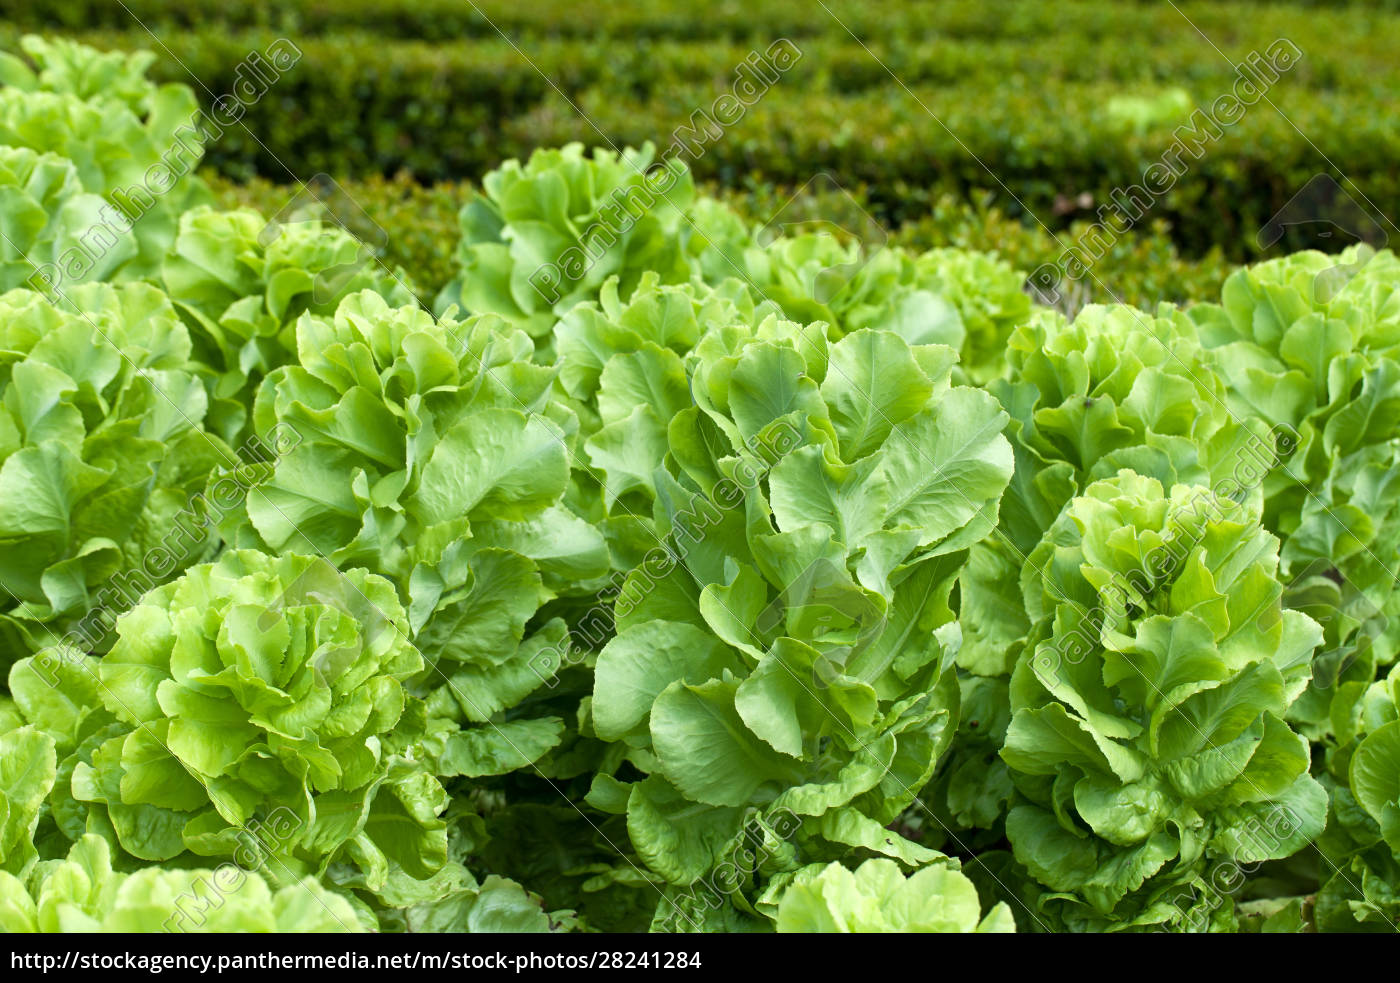 Field Of Green Frisee Lettuce Growing In Rows Royalty Free Photo Panthermedia Stock Agency